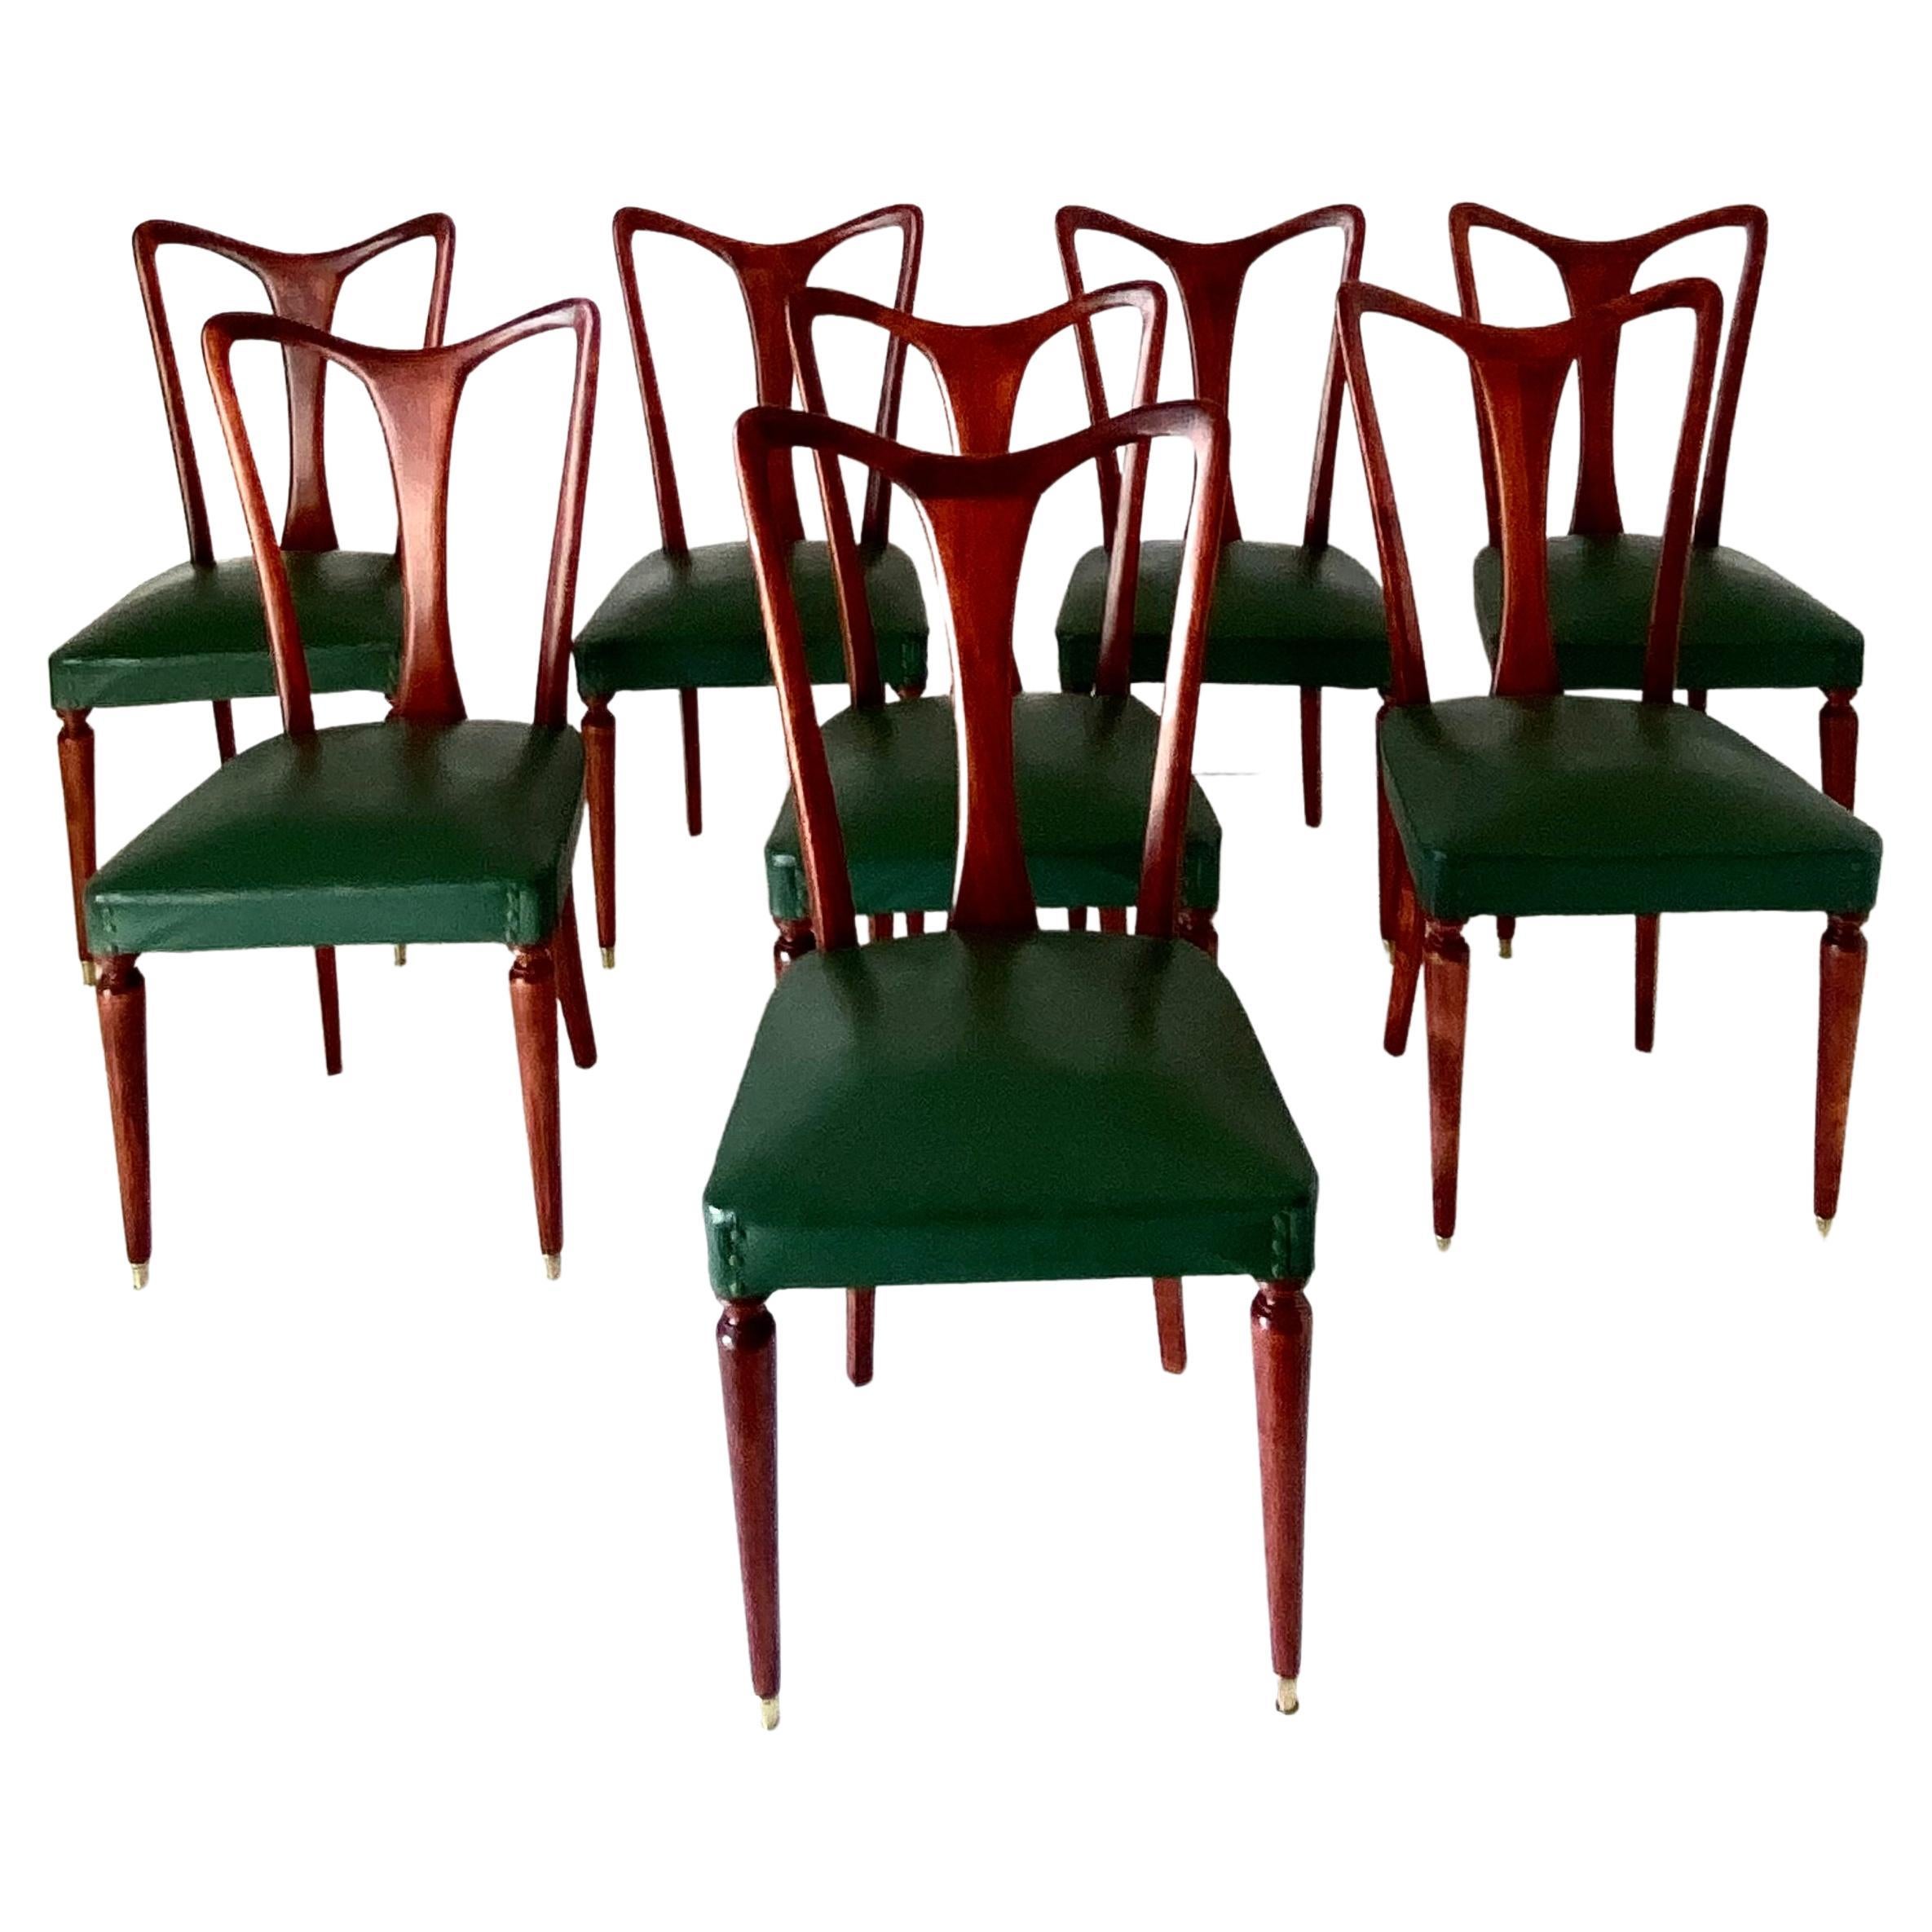 Vintage Dining Chairs, Set of Eight, Guglielmo Ulrich, Italy, 1940s